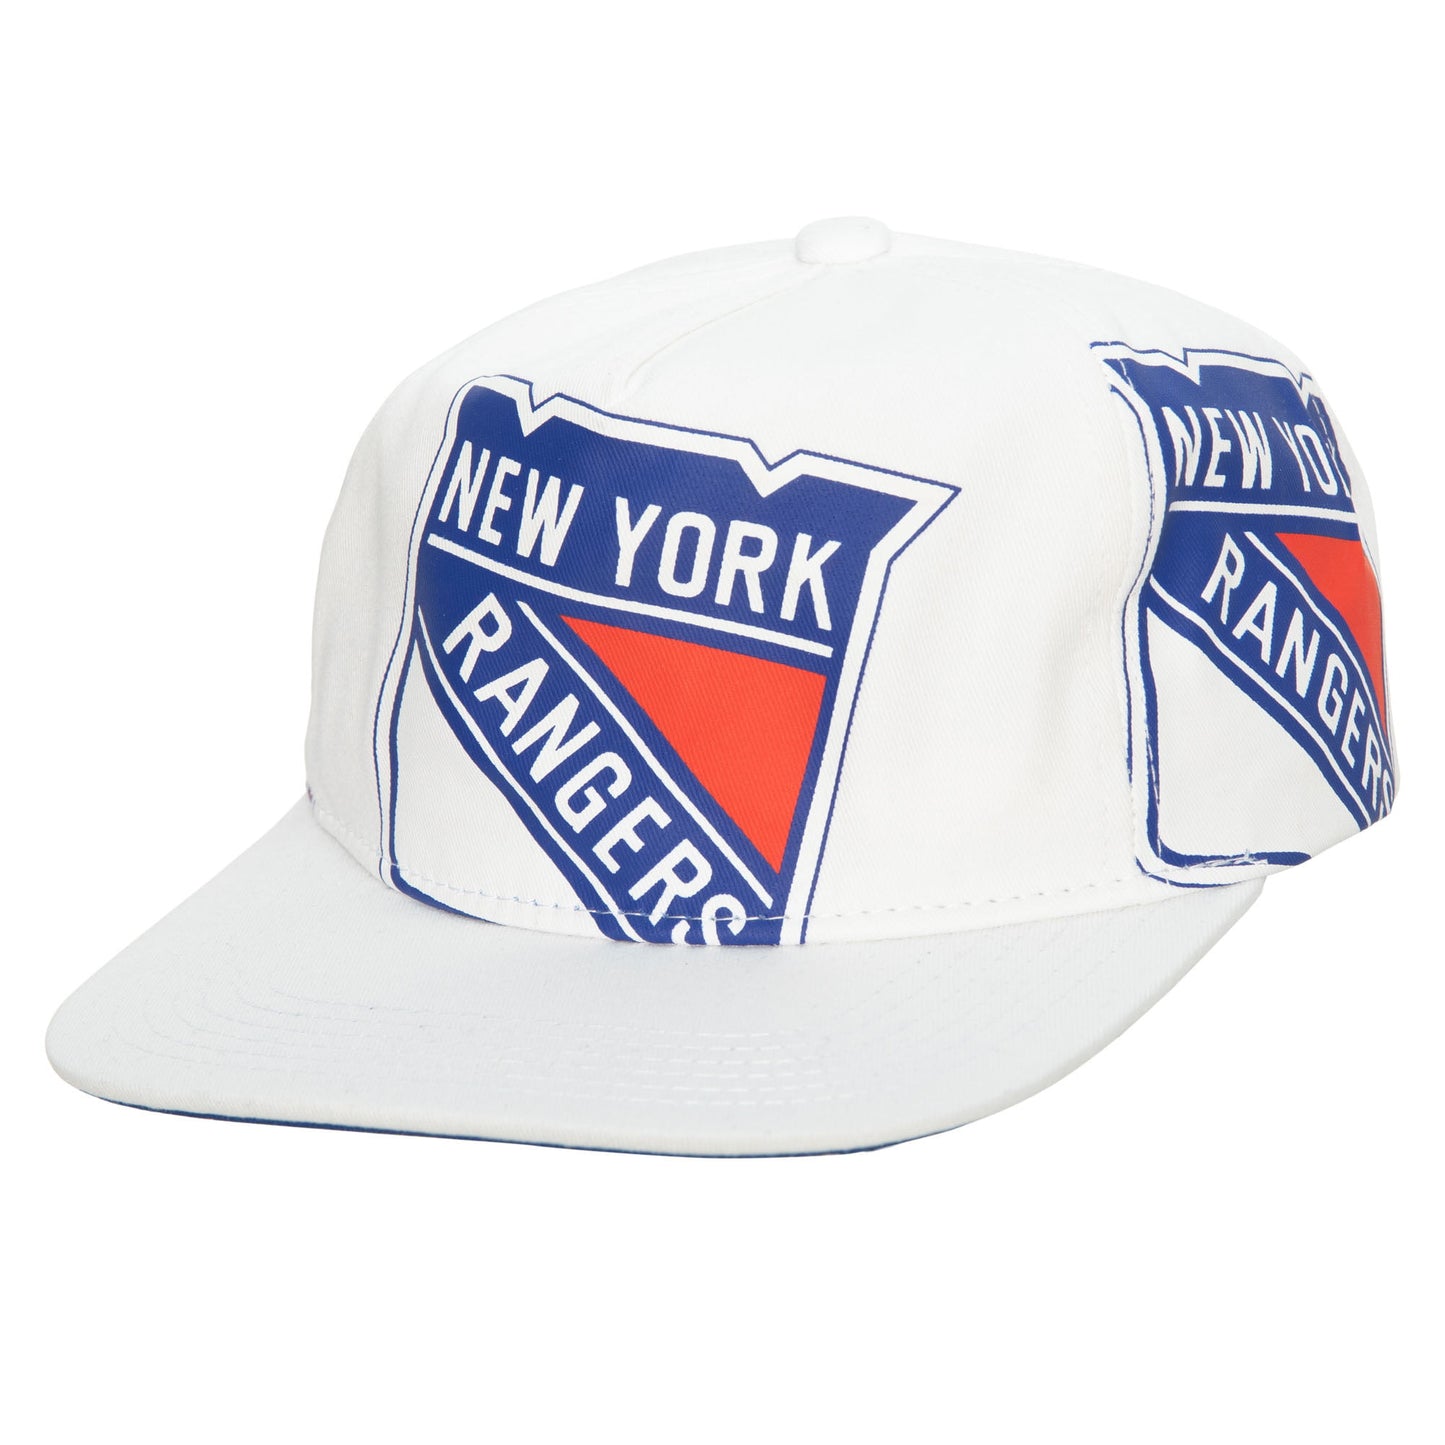 Men's Mitchell & Ness White New York Rangers In Your Face Deadstock Snapback Hat - OSFA